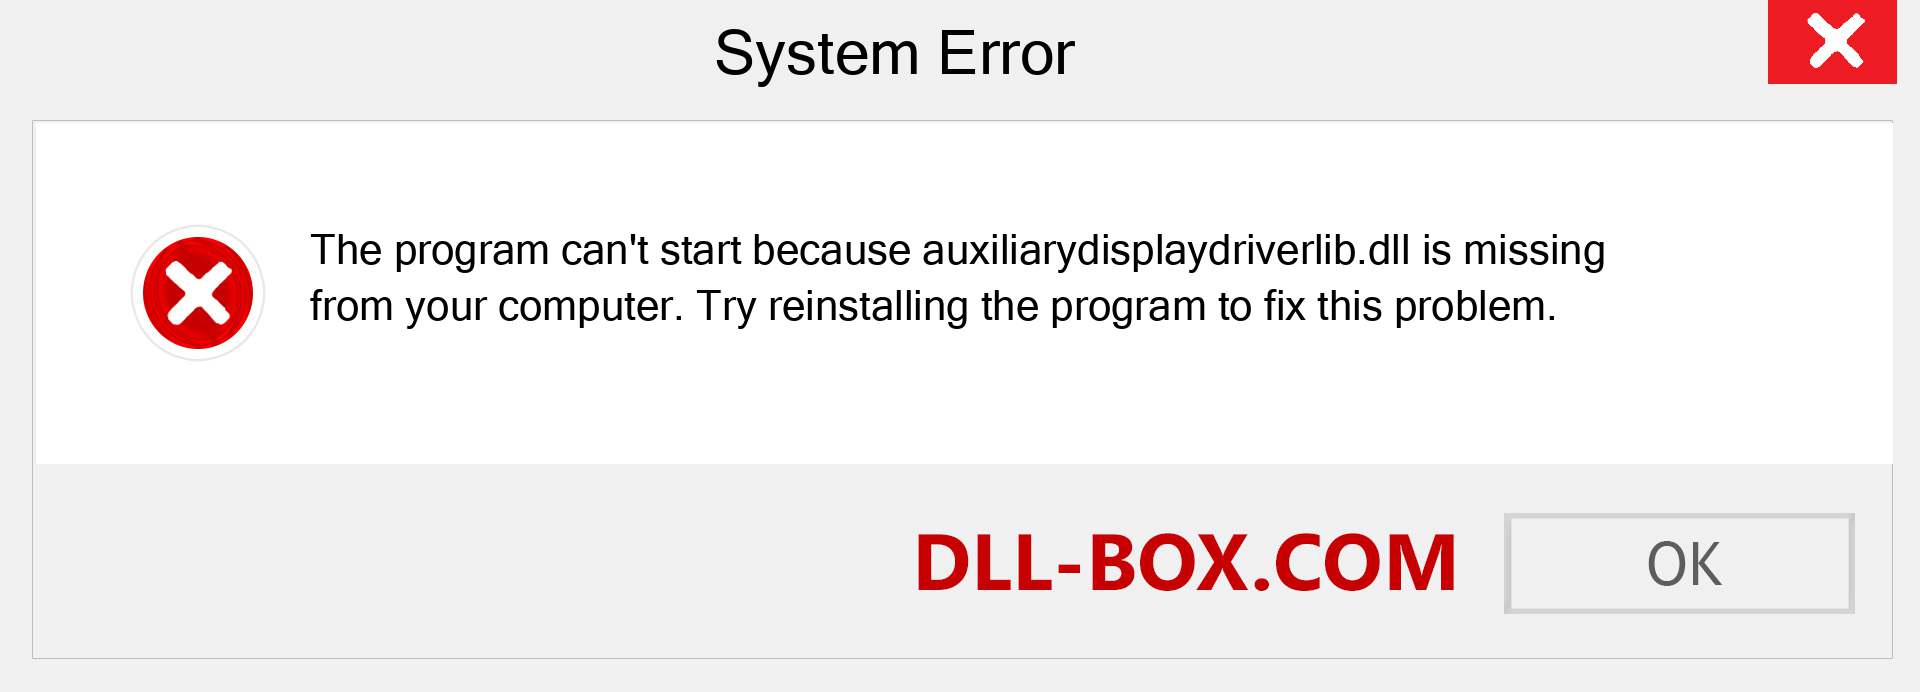  auxiliarydisplaydriverlib.dll file is missing?. Download for Windows 7, 8, 10 - Fix  auxiliarydisplaydriverlib dll Missing Error on Windows, photos, images